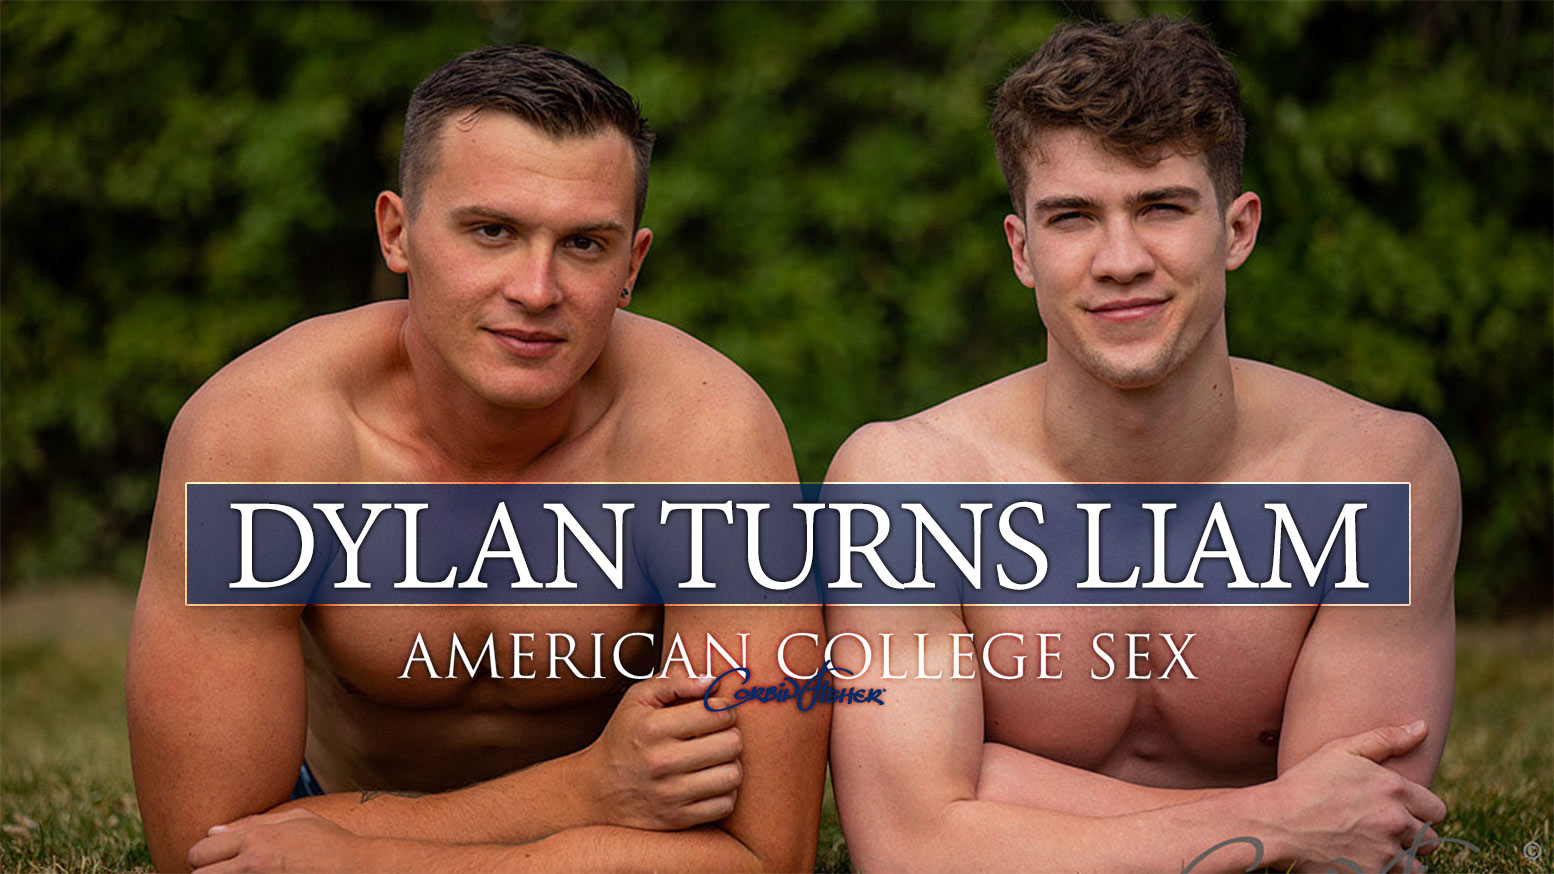 Dylan turns liam corbin fisher ❤️ Best adult photos at gayporn.id